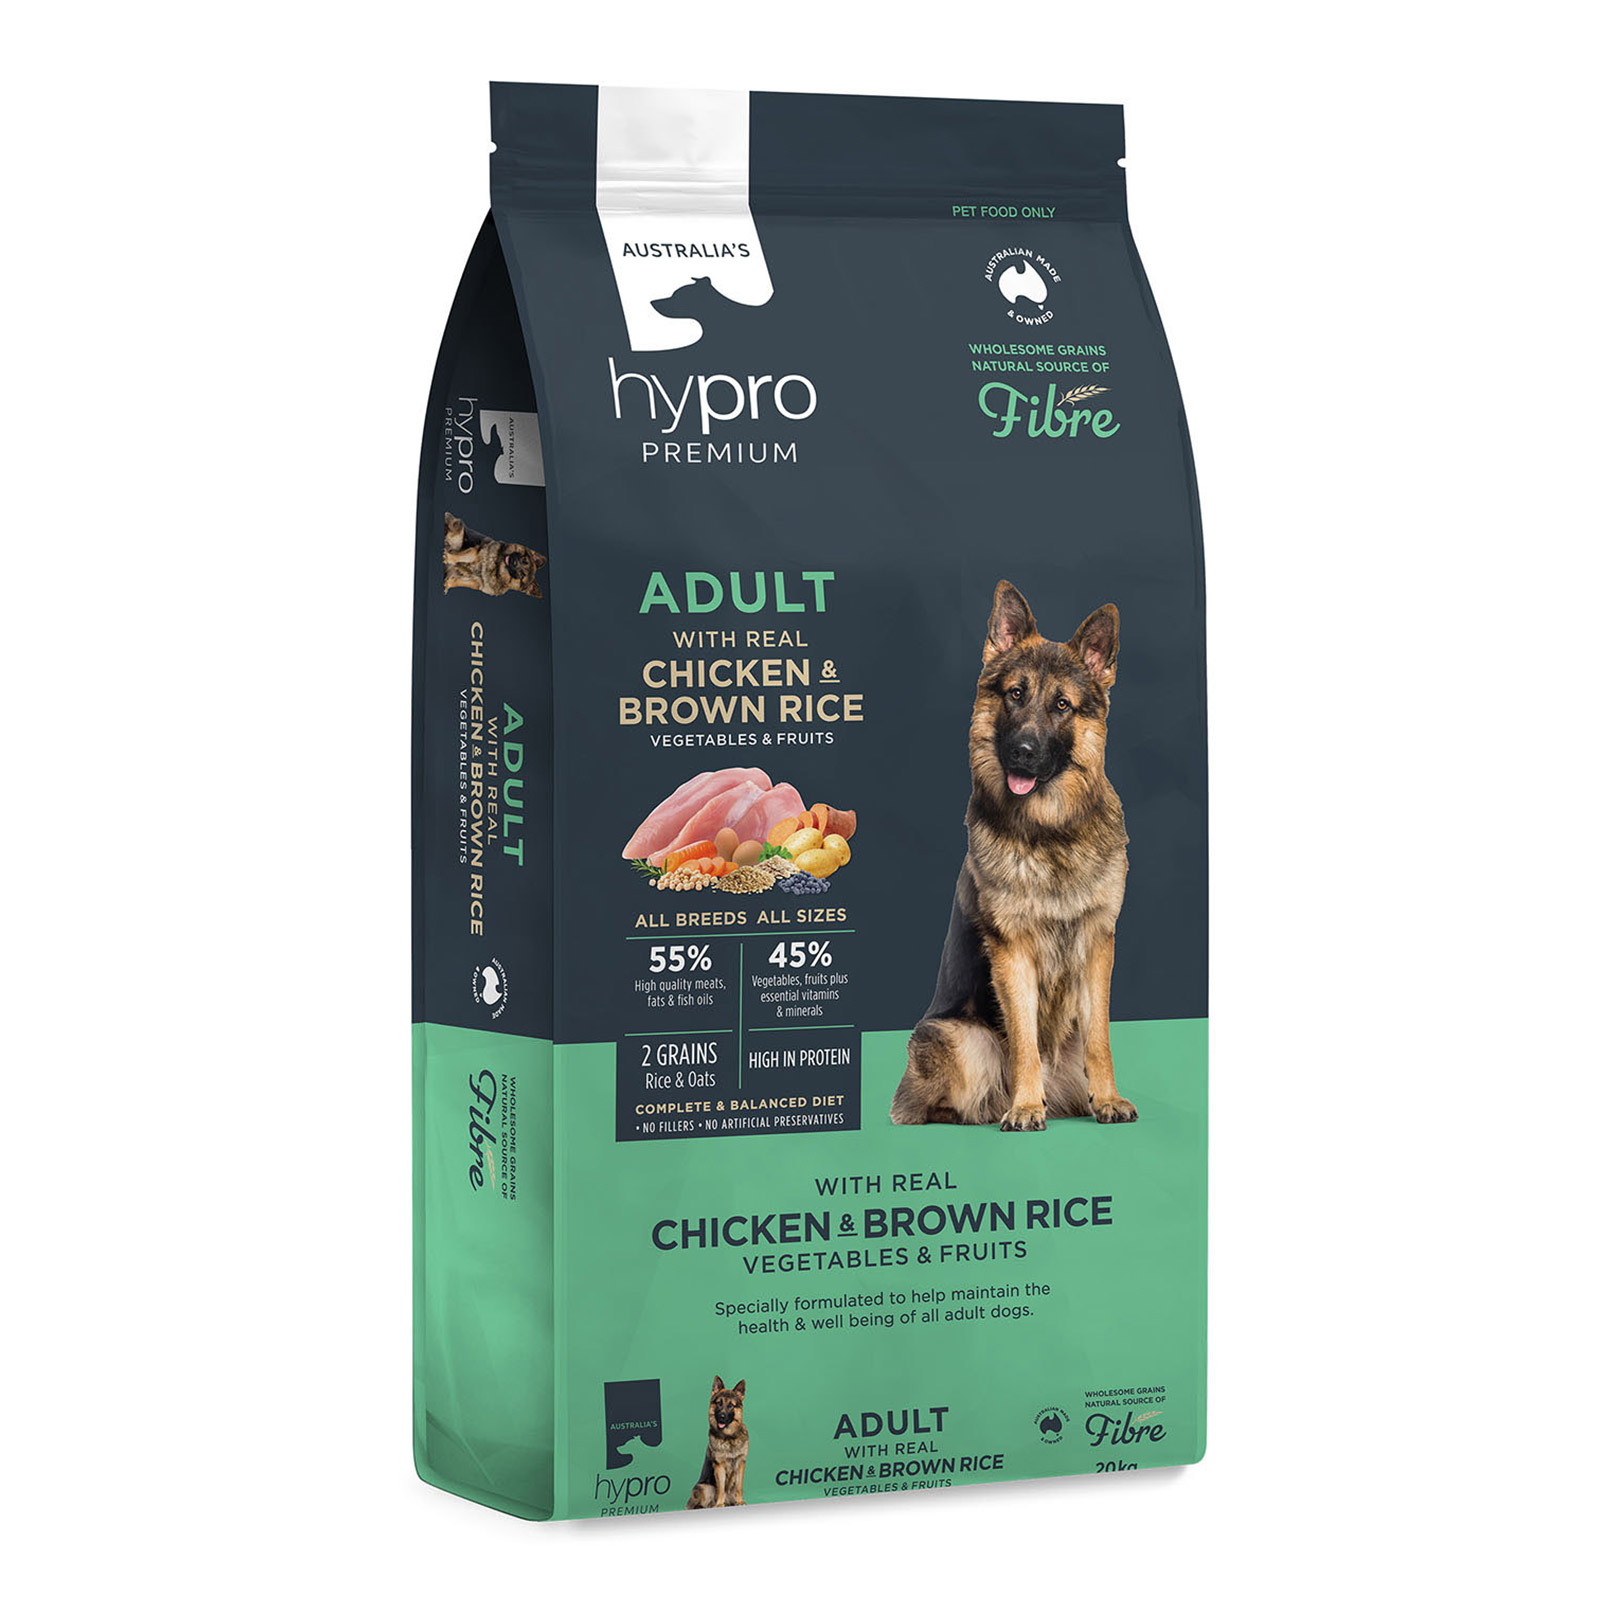 Hypro Premium Wholesome Grains Adult Dog Food (Chicken & Brown Rice)